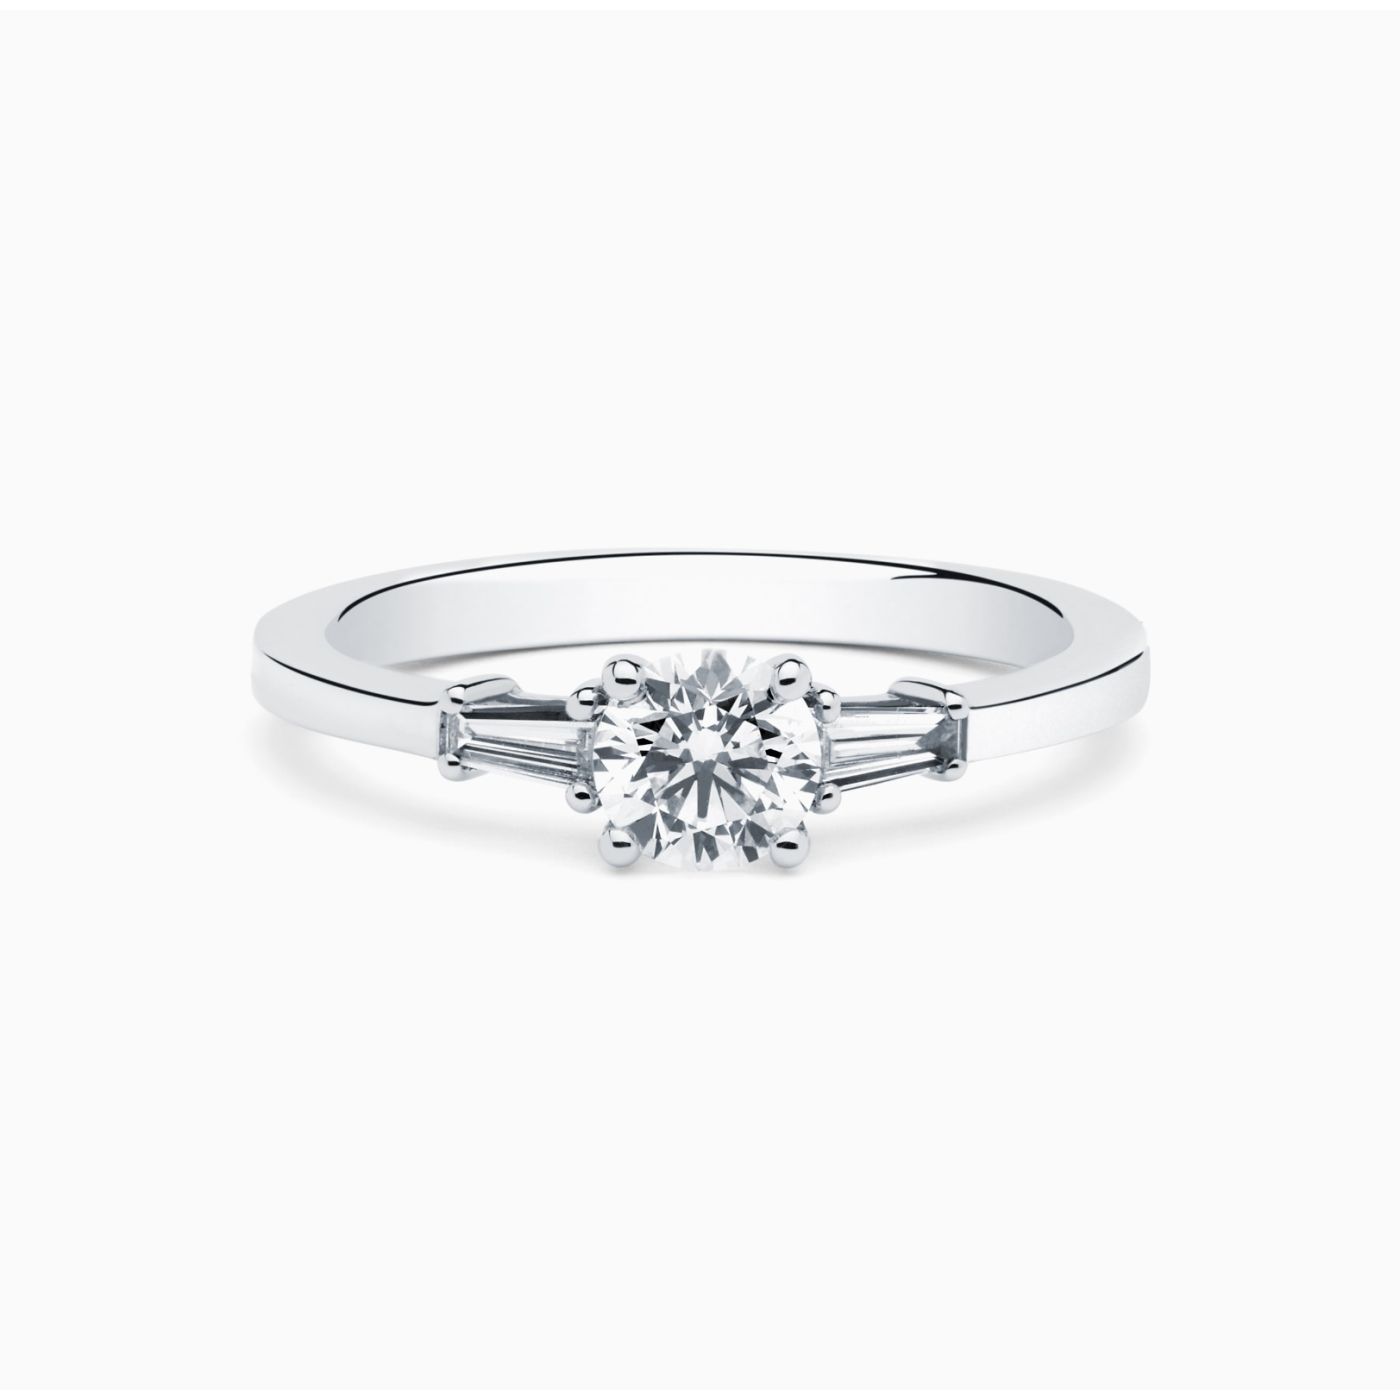 White gold engagement ring with central diamond and diamonds typers